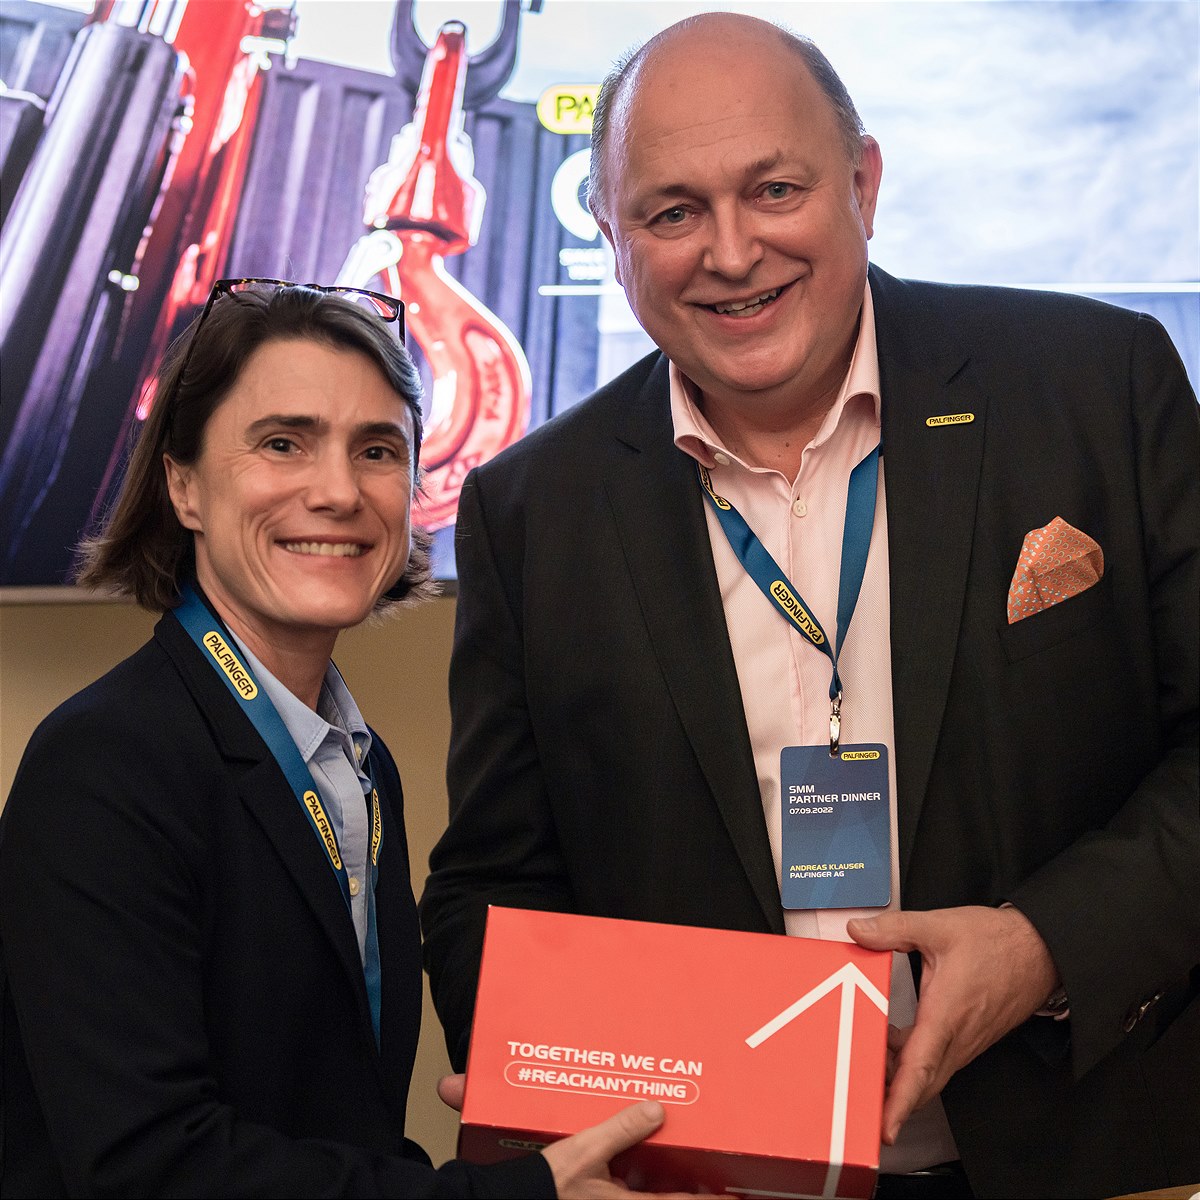 Natasha Covas-Kneiss, CEO & Vice Chair ELTRAK GROUP and Andreas Klauser, CEO at PALFINGER AG at the evening event to celebrate the signing ceremony at SMM in Hamburg.